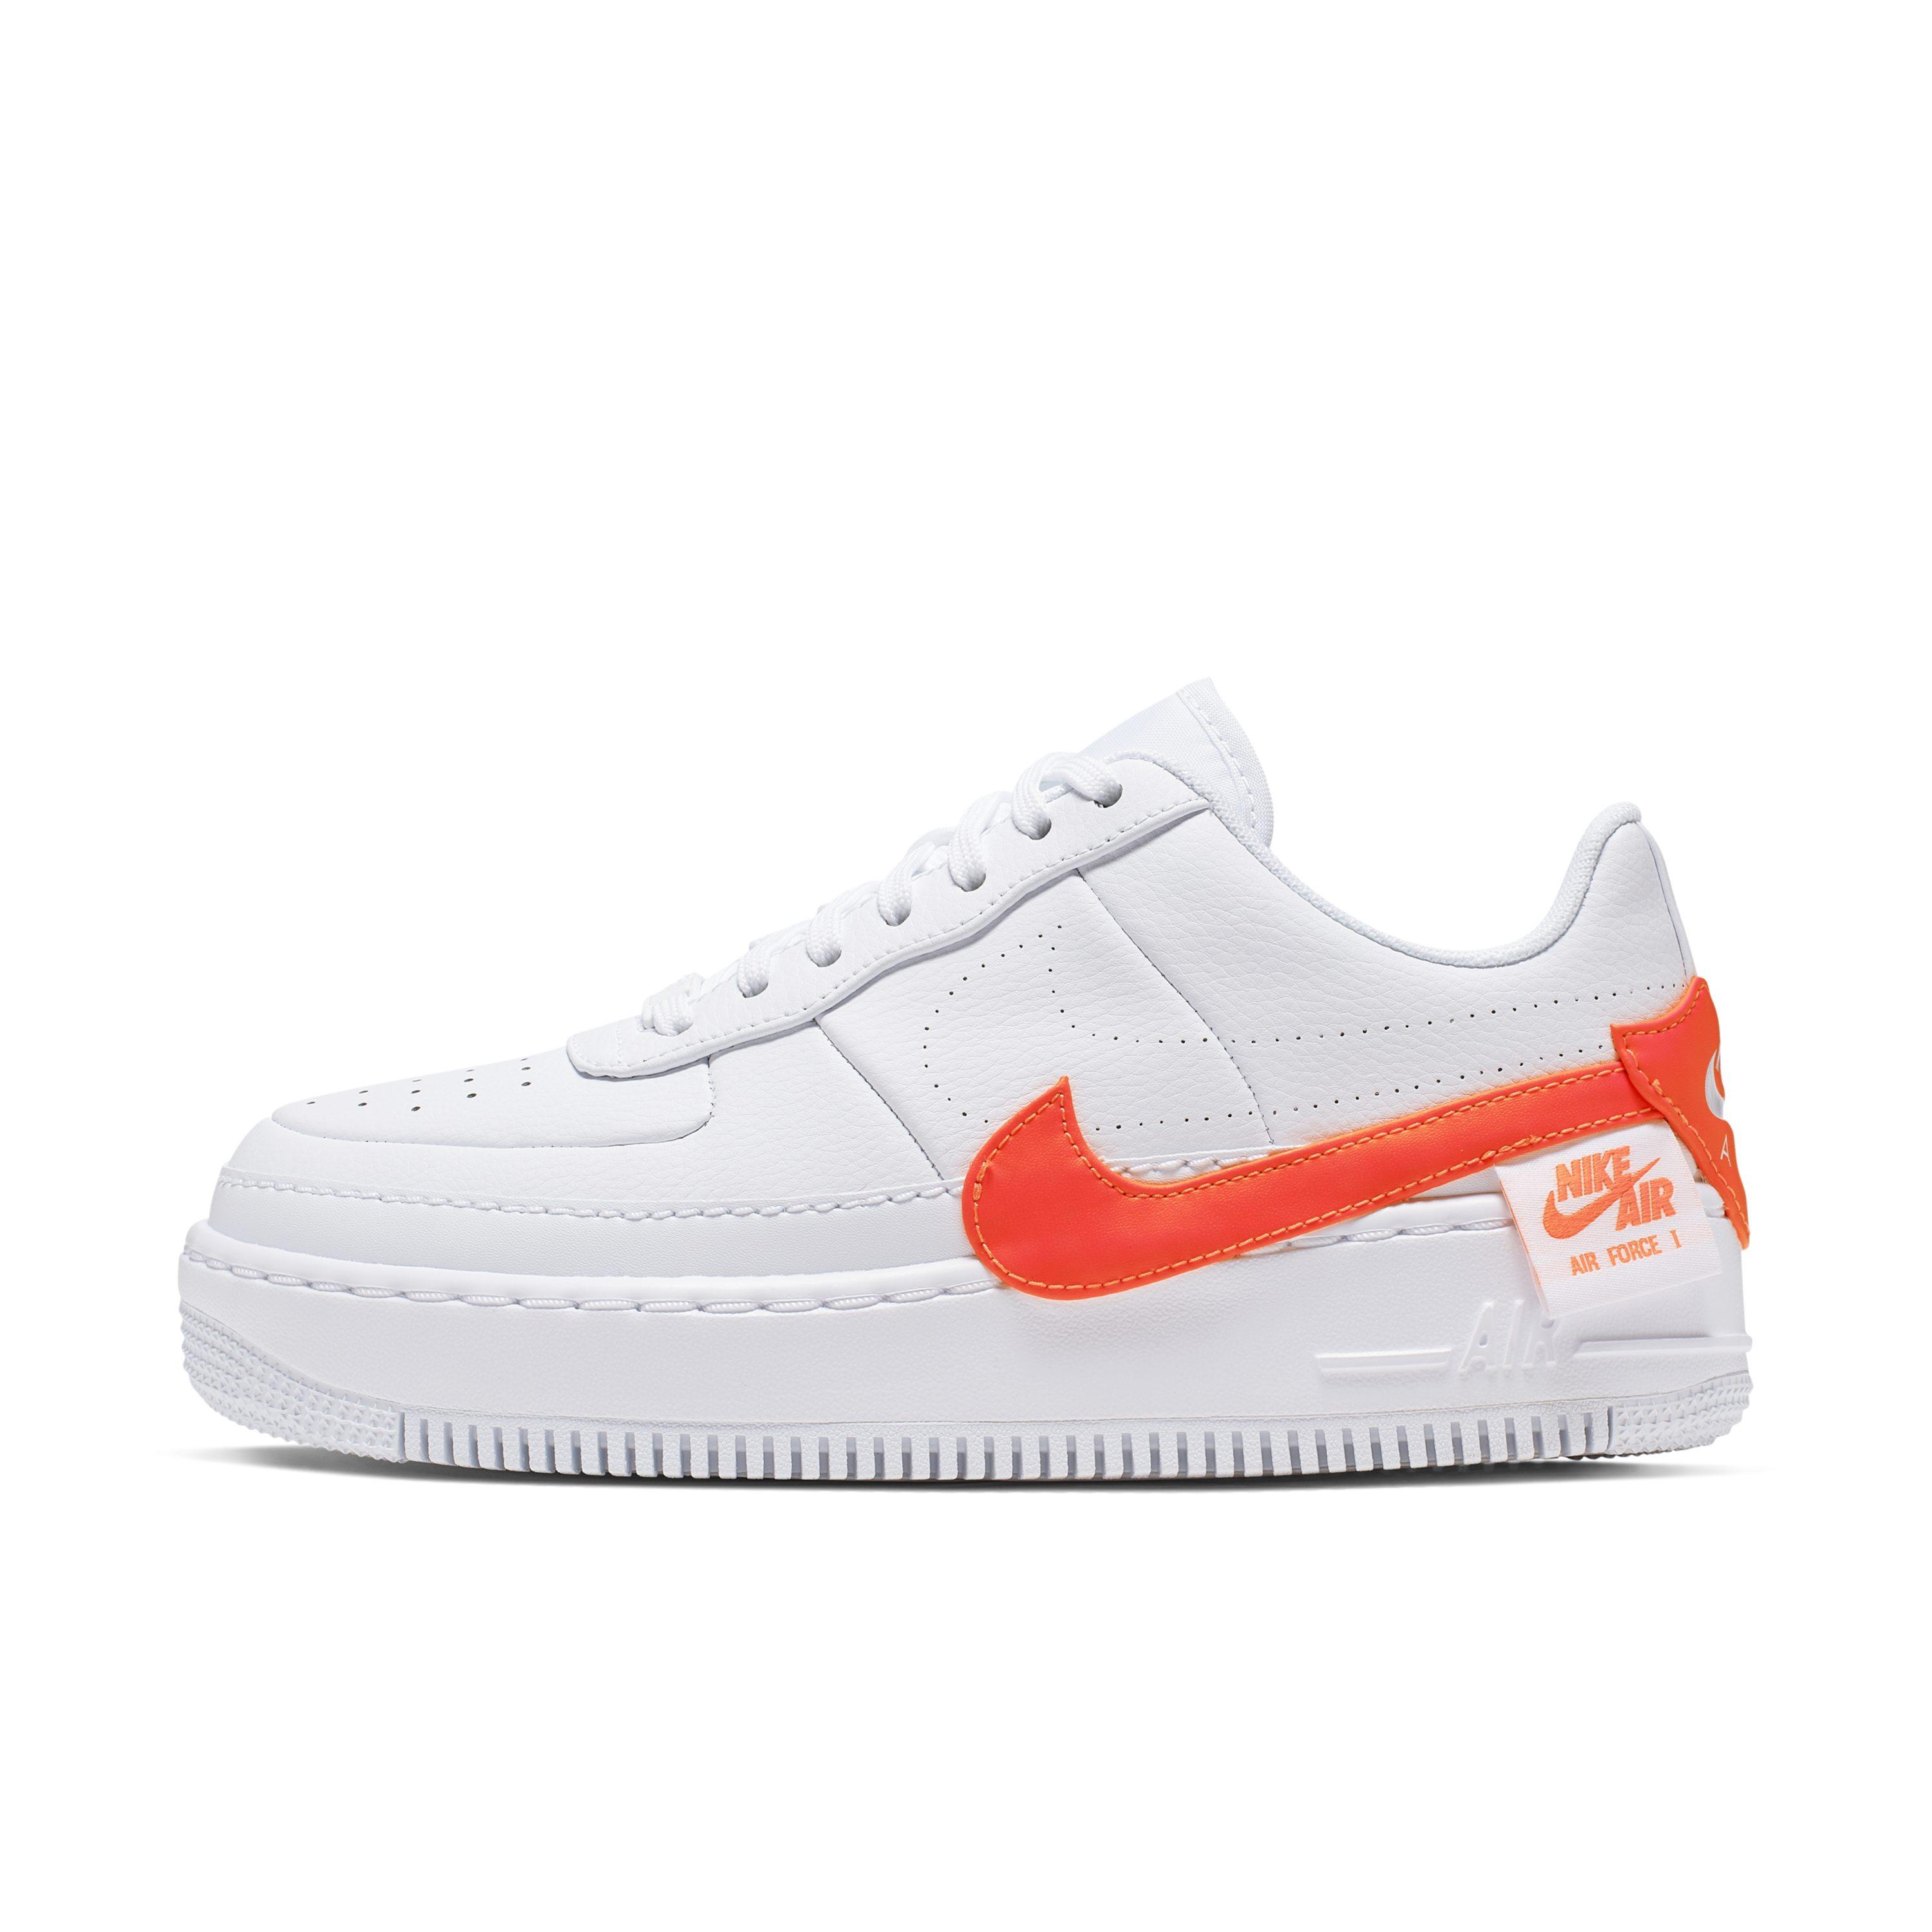 Nike Air Force 1 Jester Xx Shoe in White - Lyst